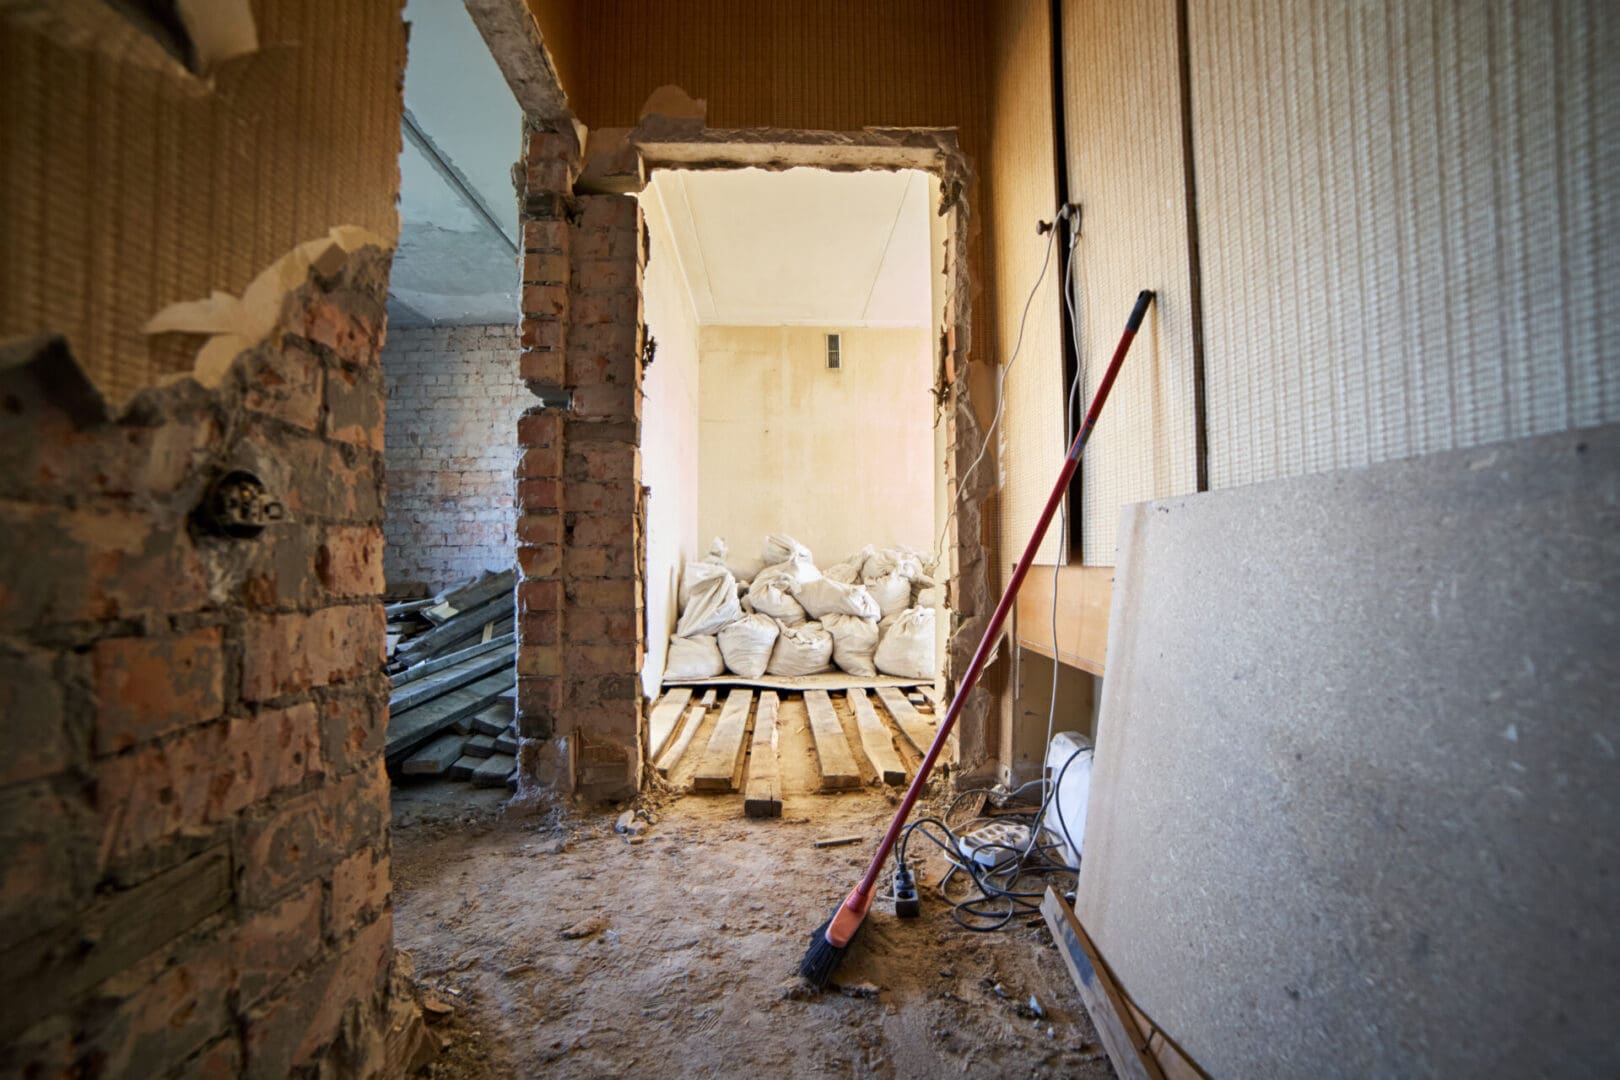 A room with rubble and a broom in it